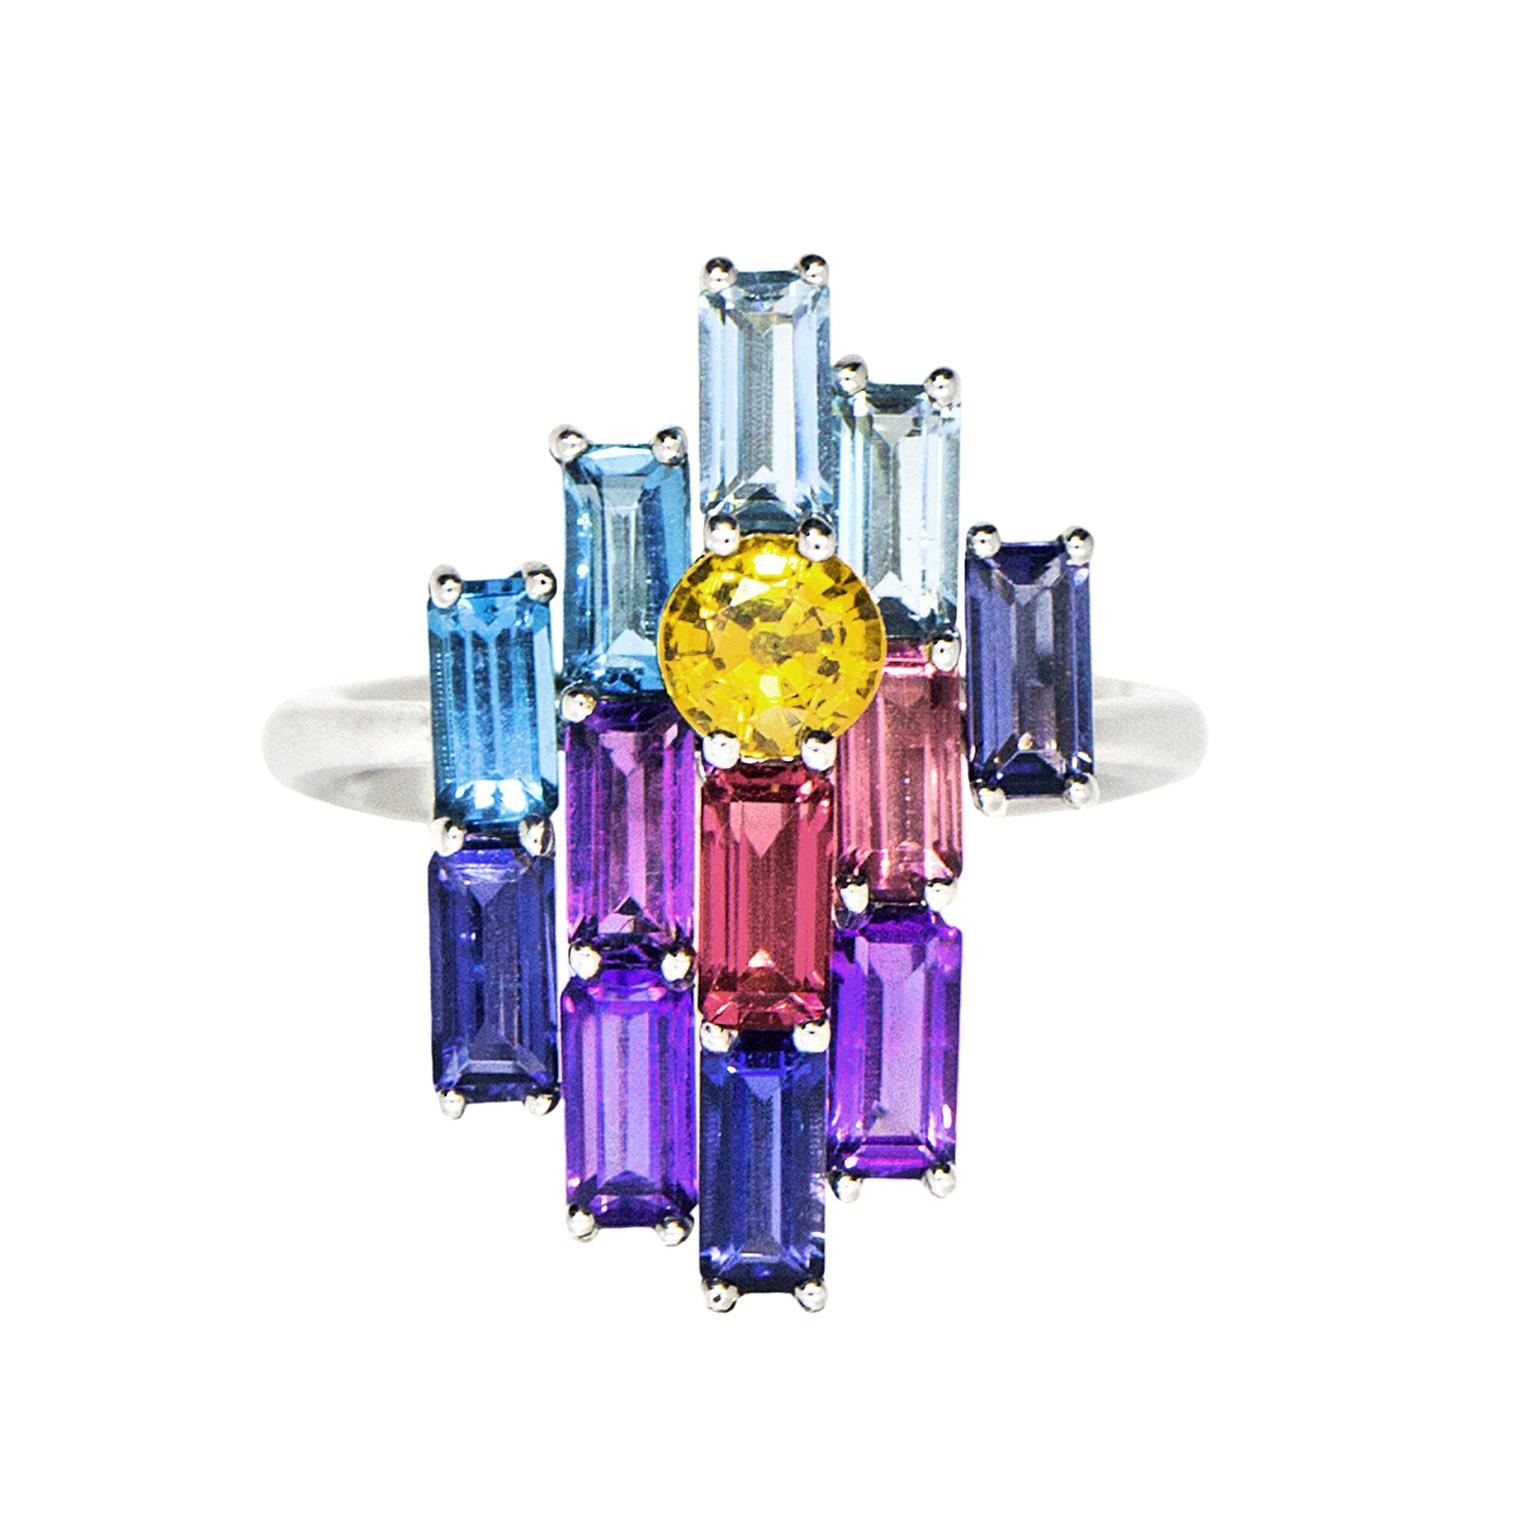 Daou Morning Bright multicolour gemstone ring in white gold